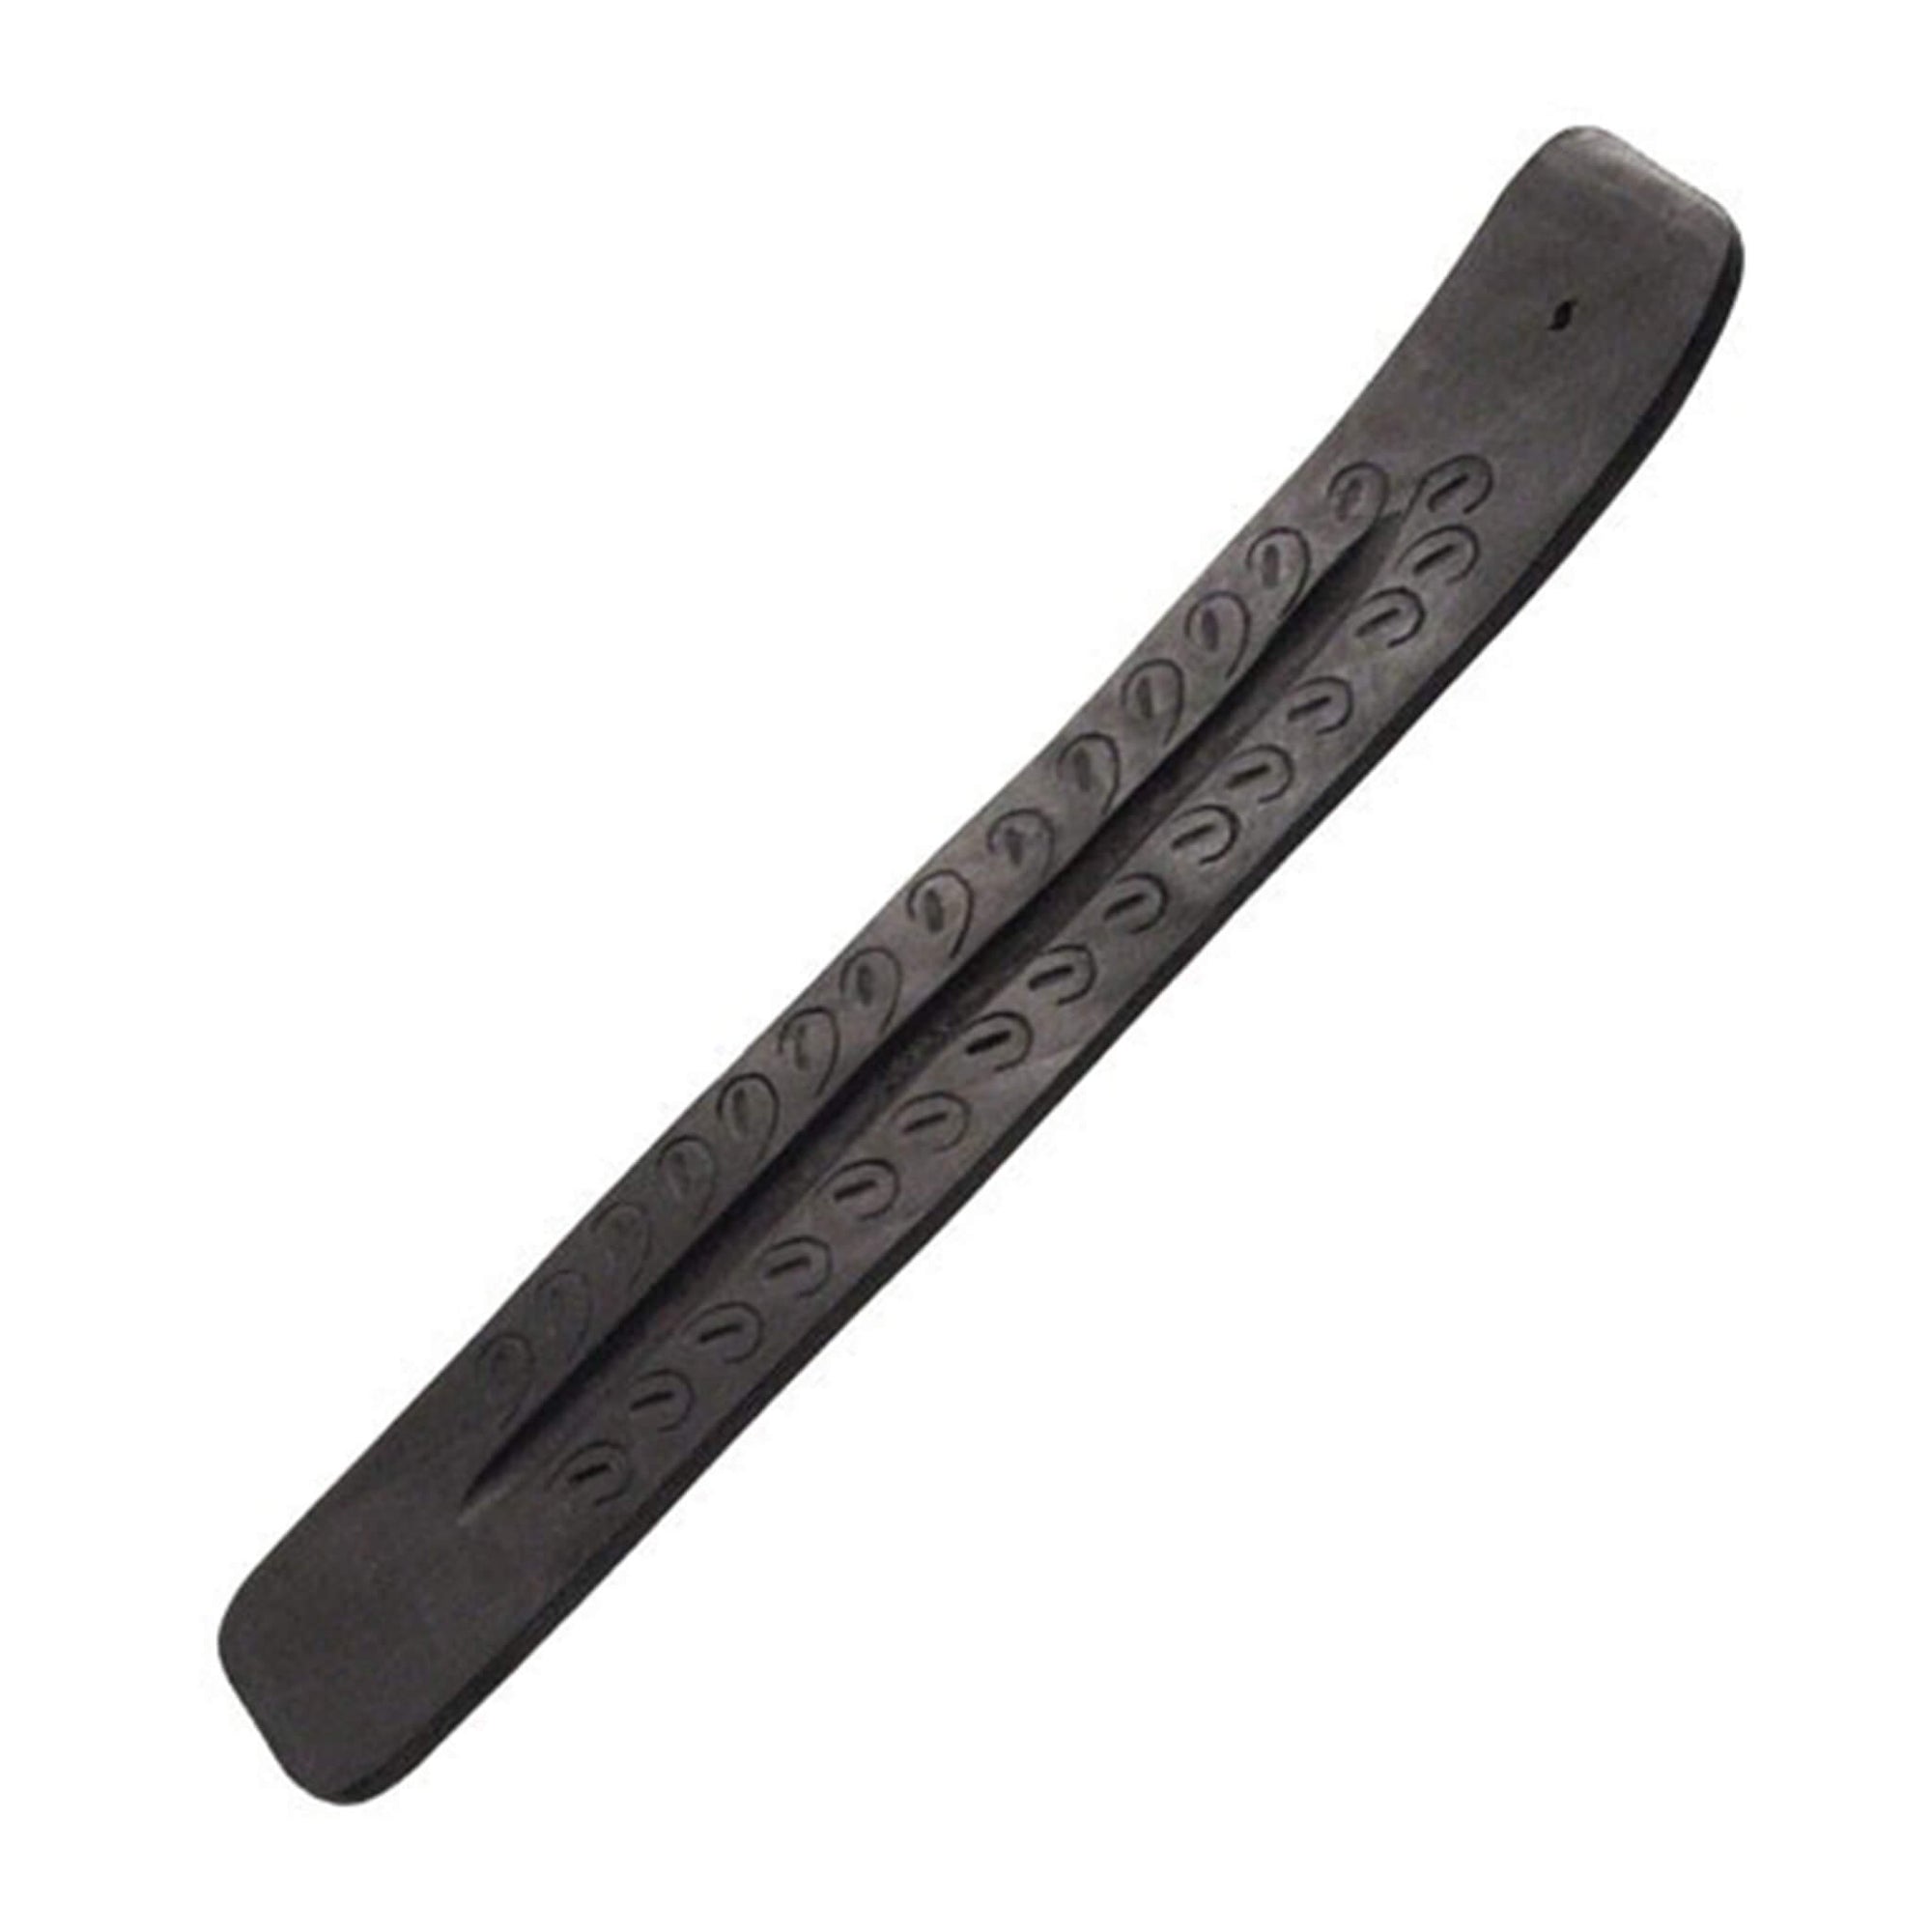 Black Stick Incense Burner | Profile View | the dabbing specialists